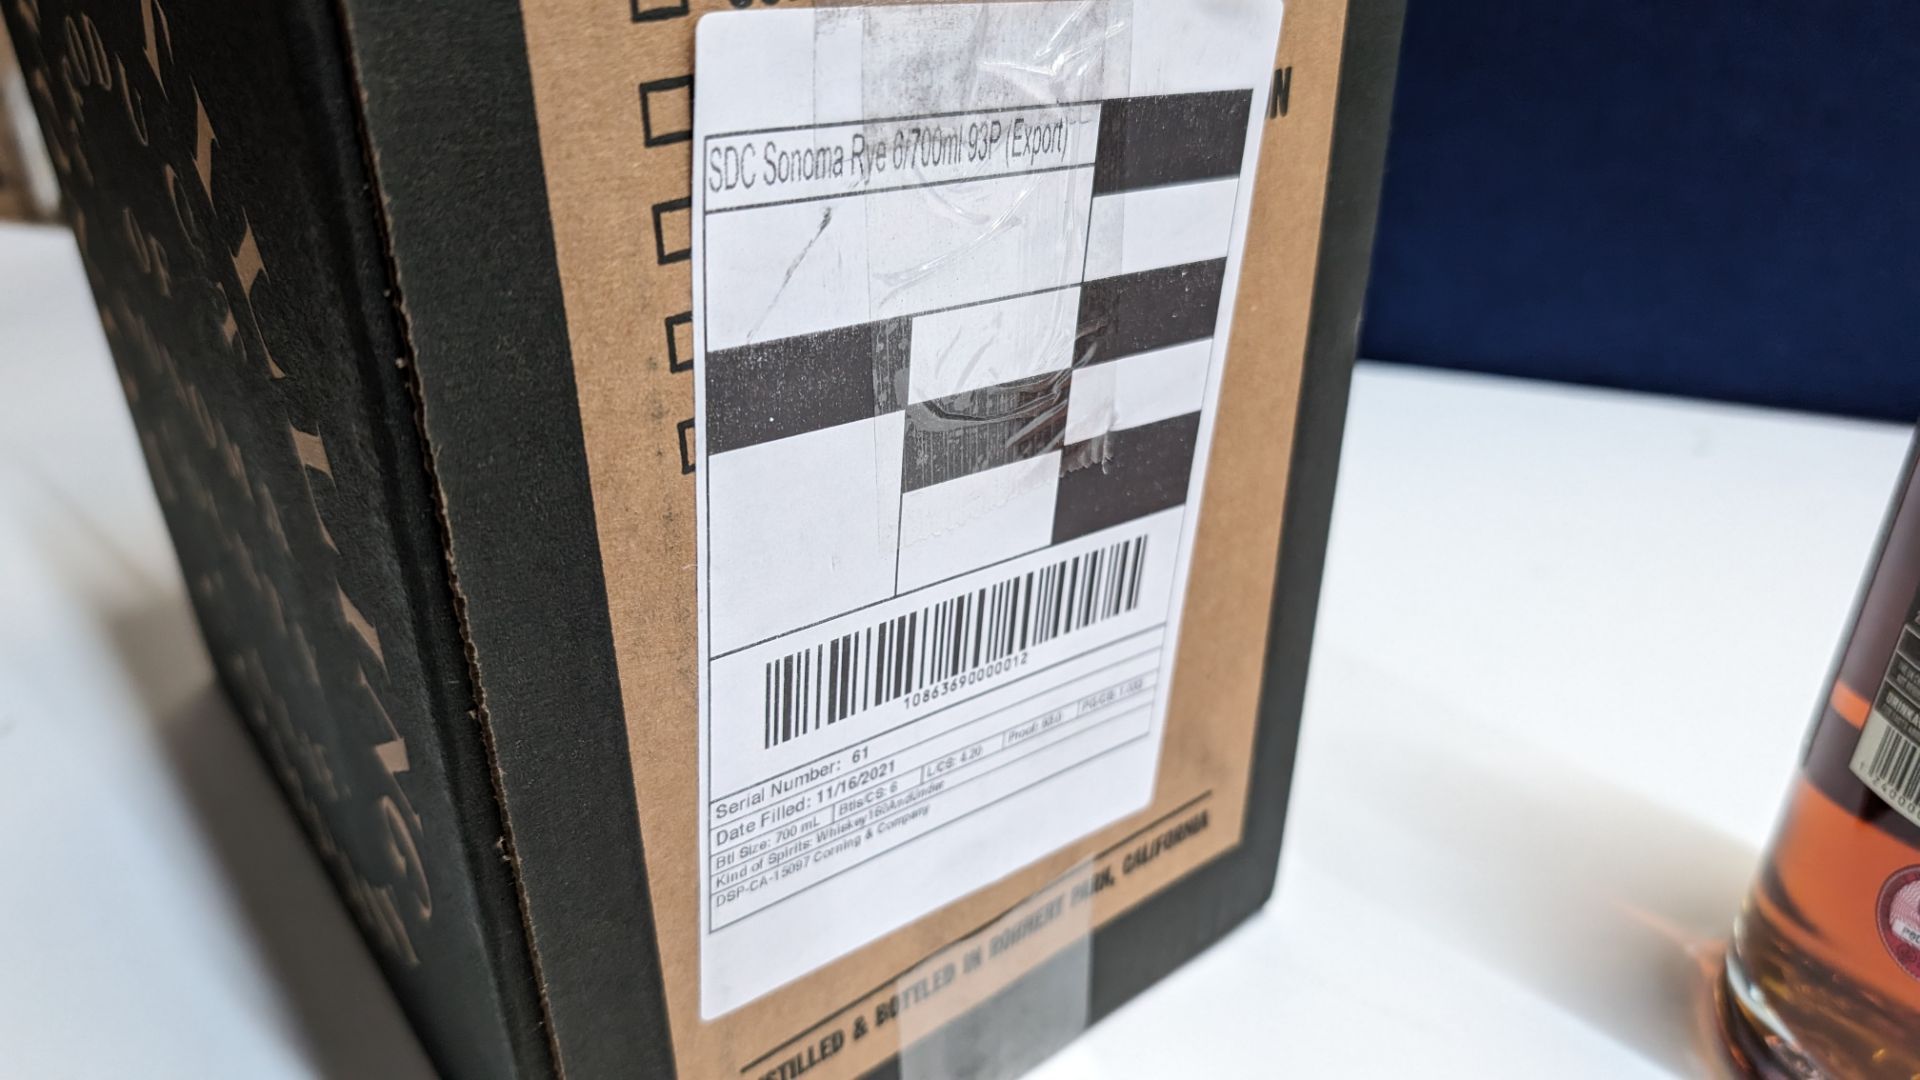 6 off 700ml bottles of Sonoma Rye Whiskey. In Sonoma branded box which includes bottling details on - Image 8 of 8